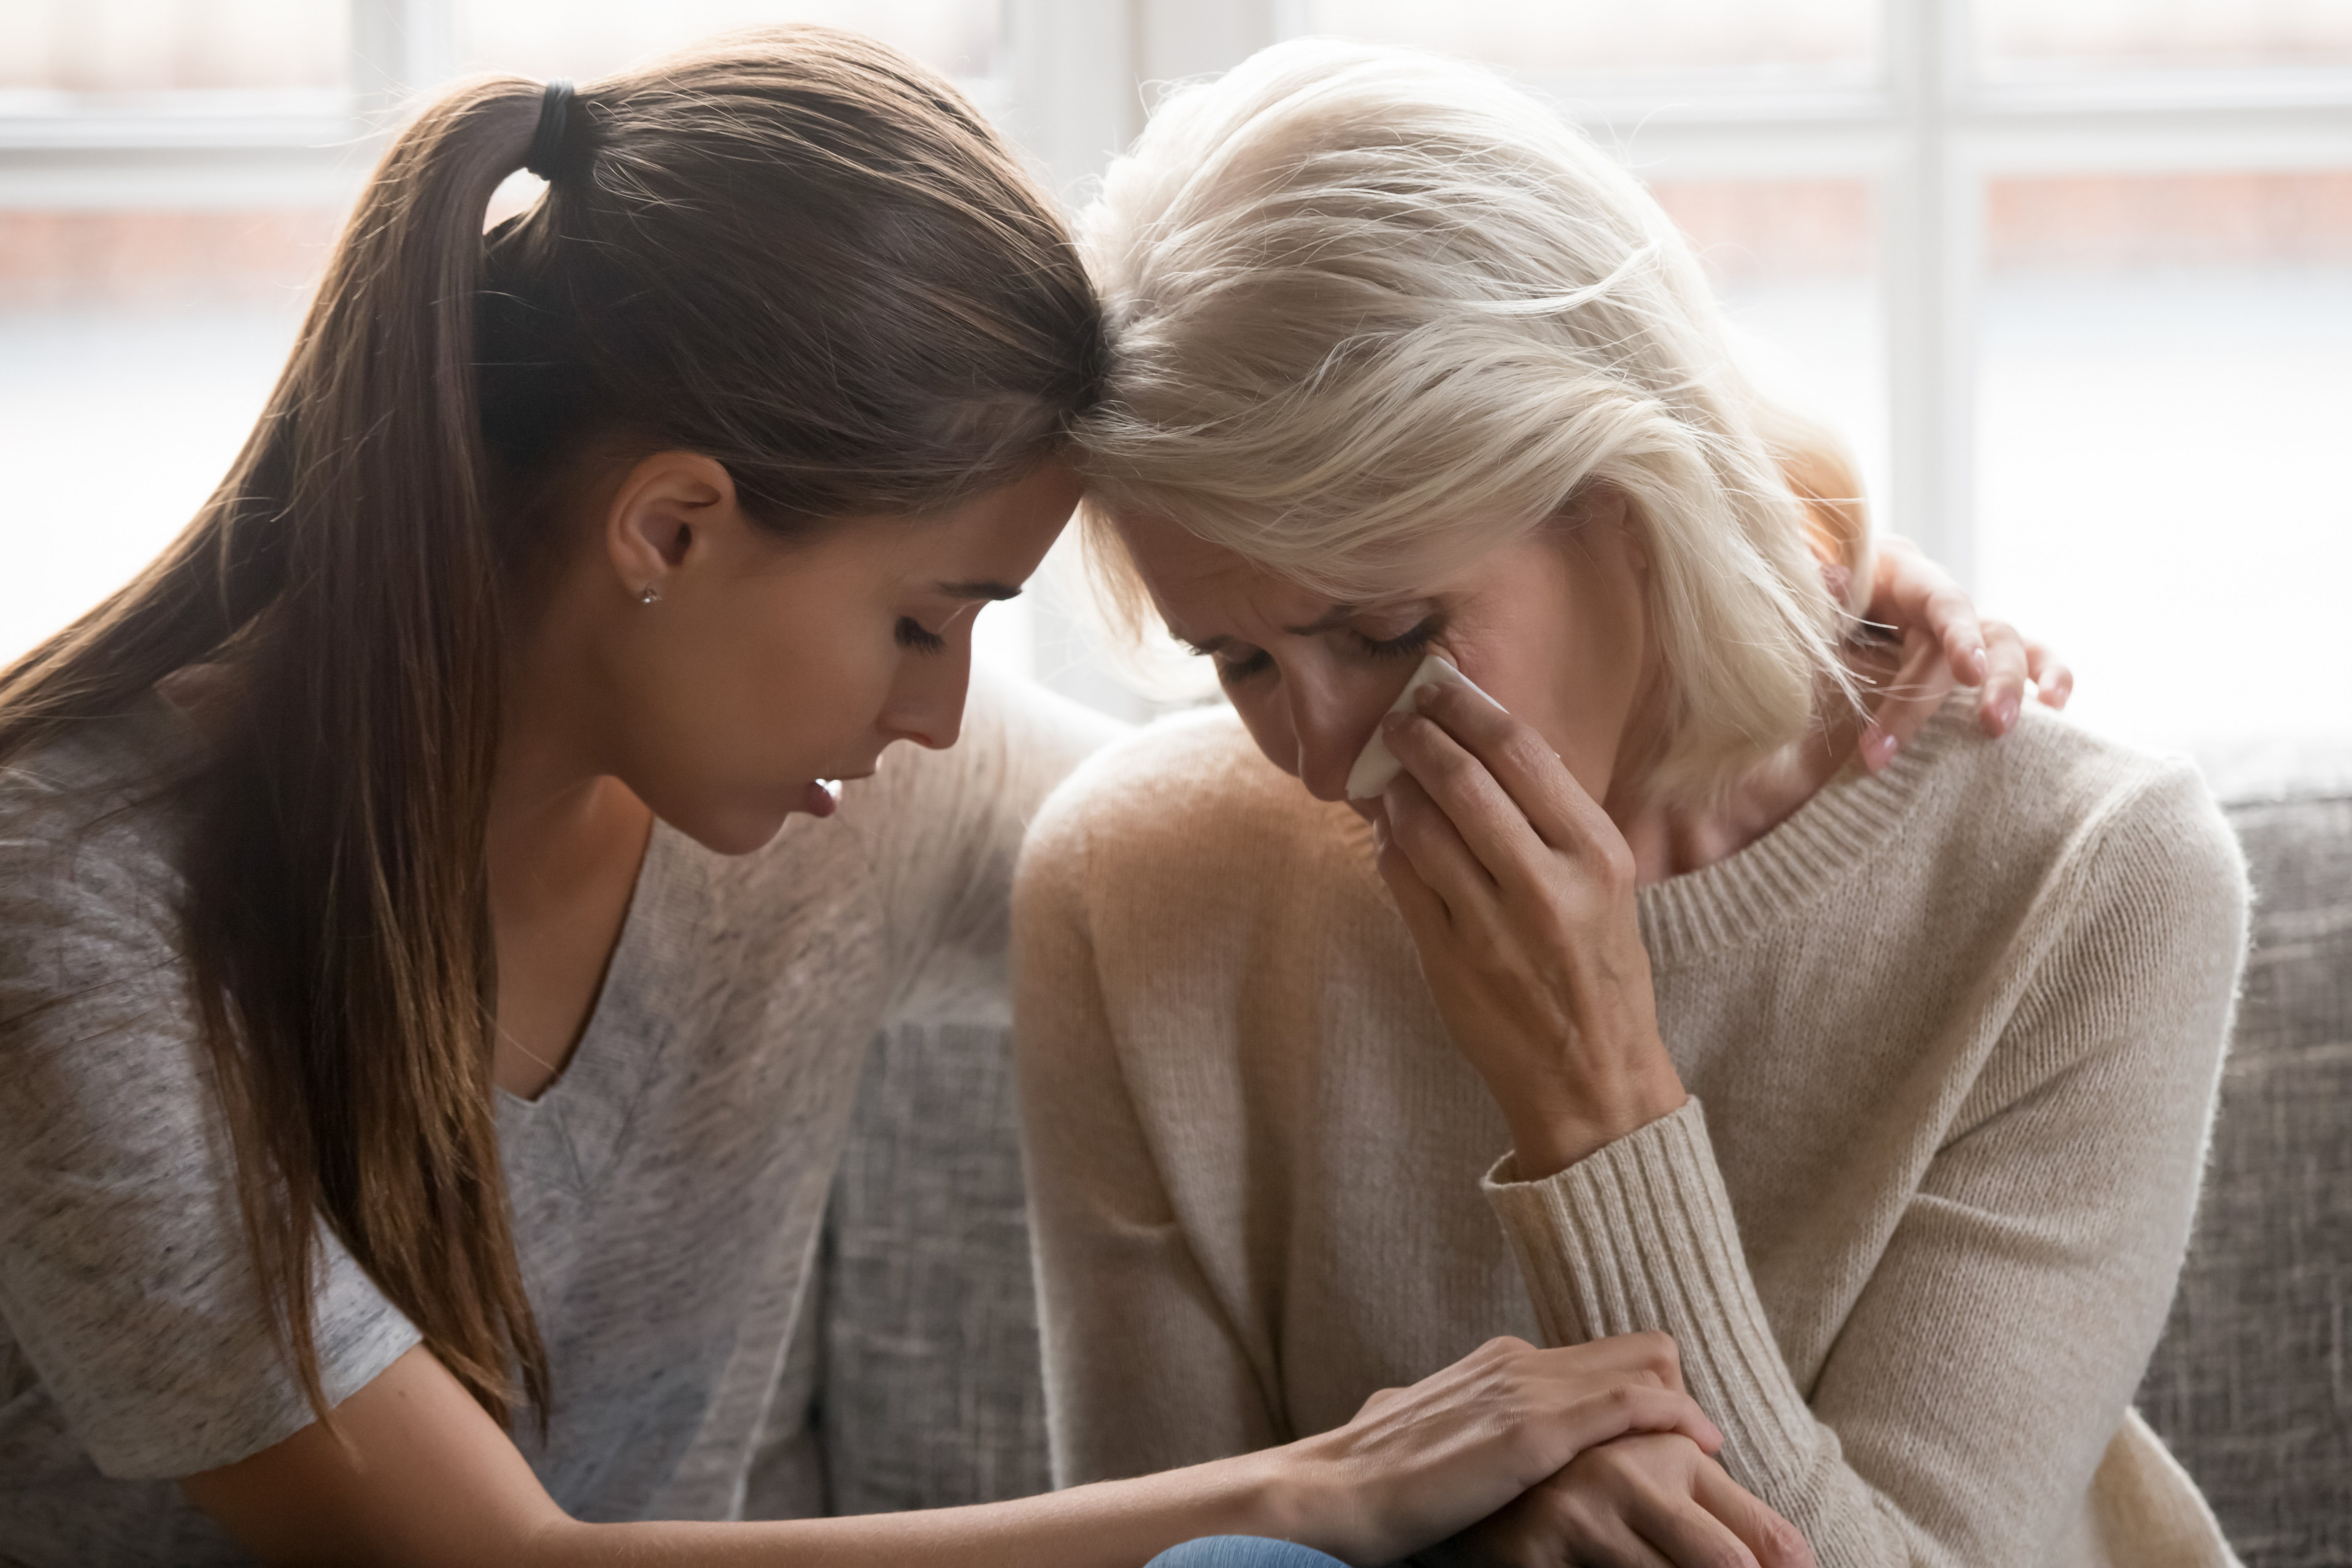 Grown-up daughter feeling sorry for her mother | Source: Shutterstock